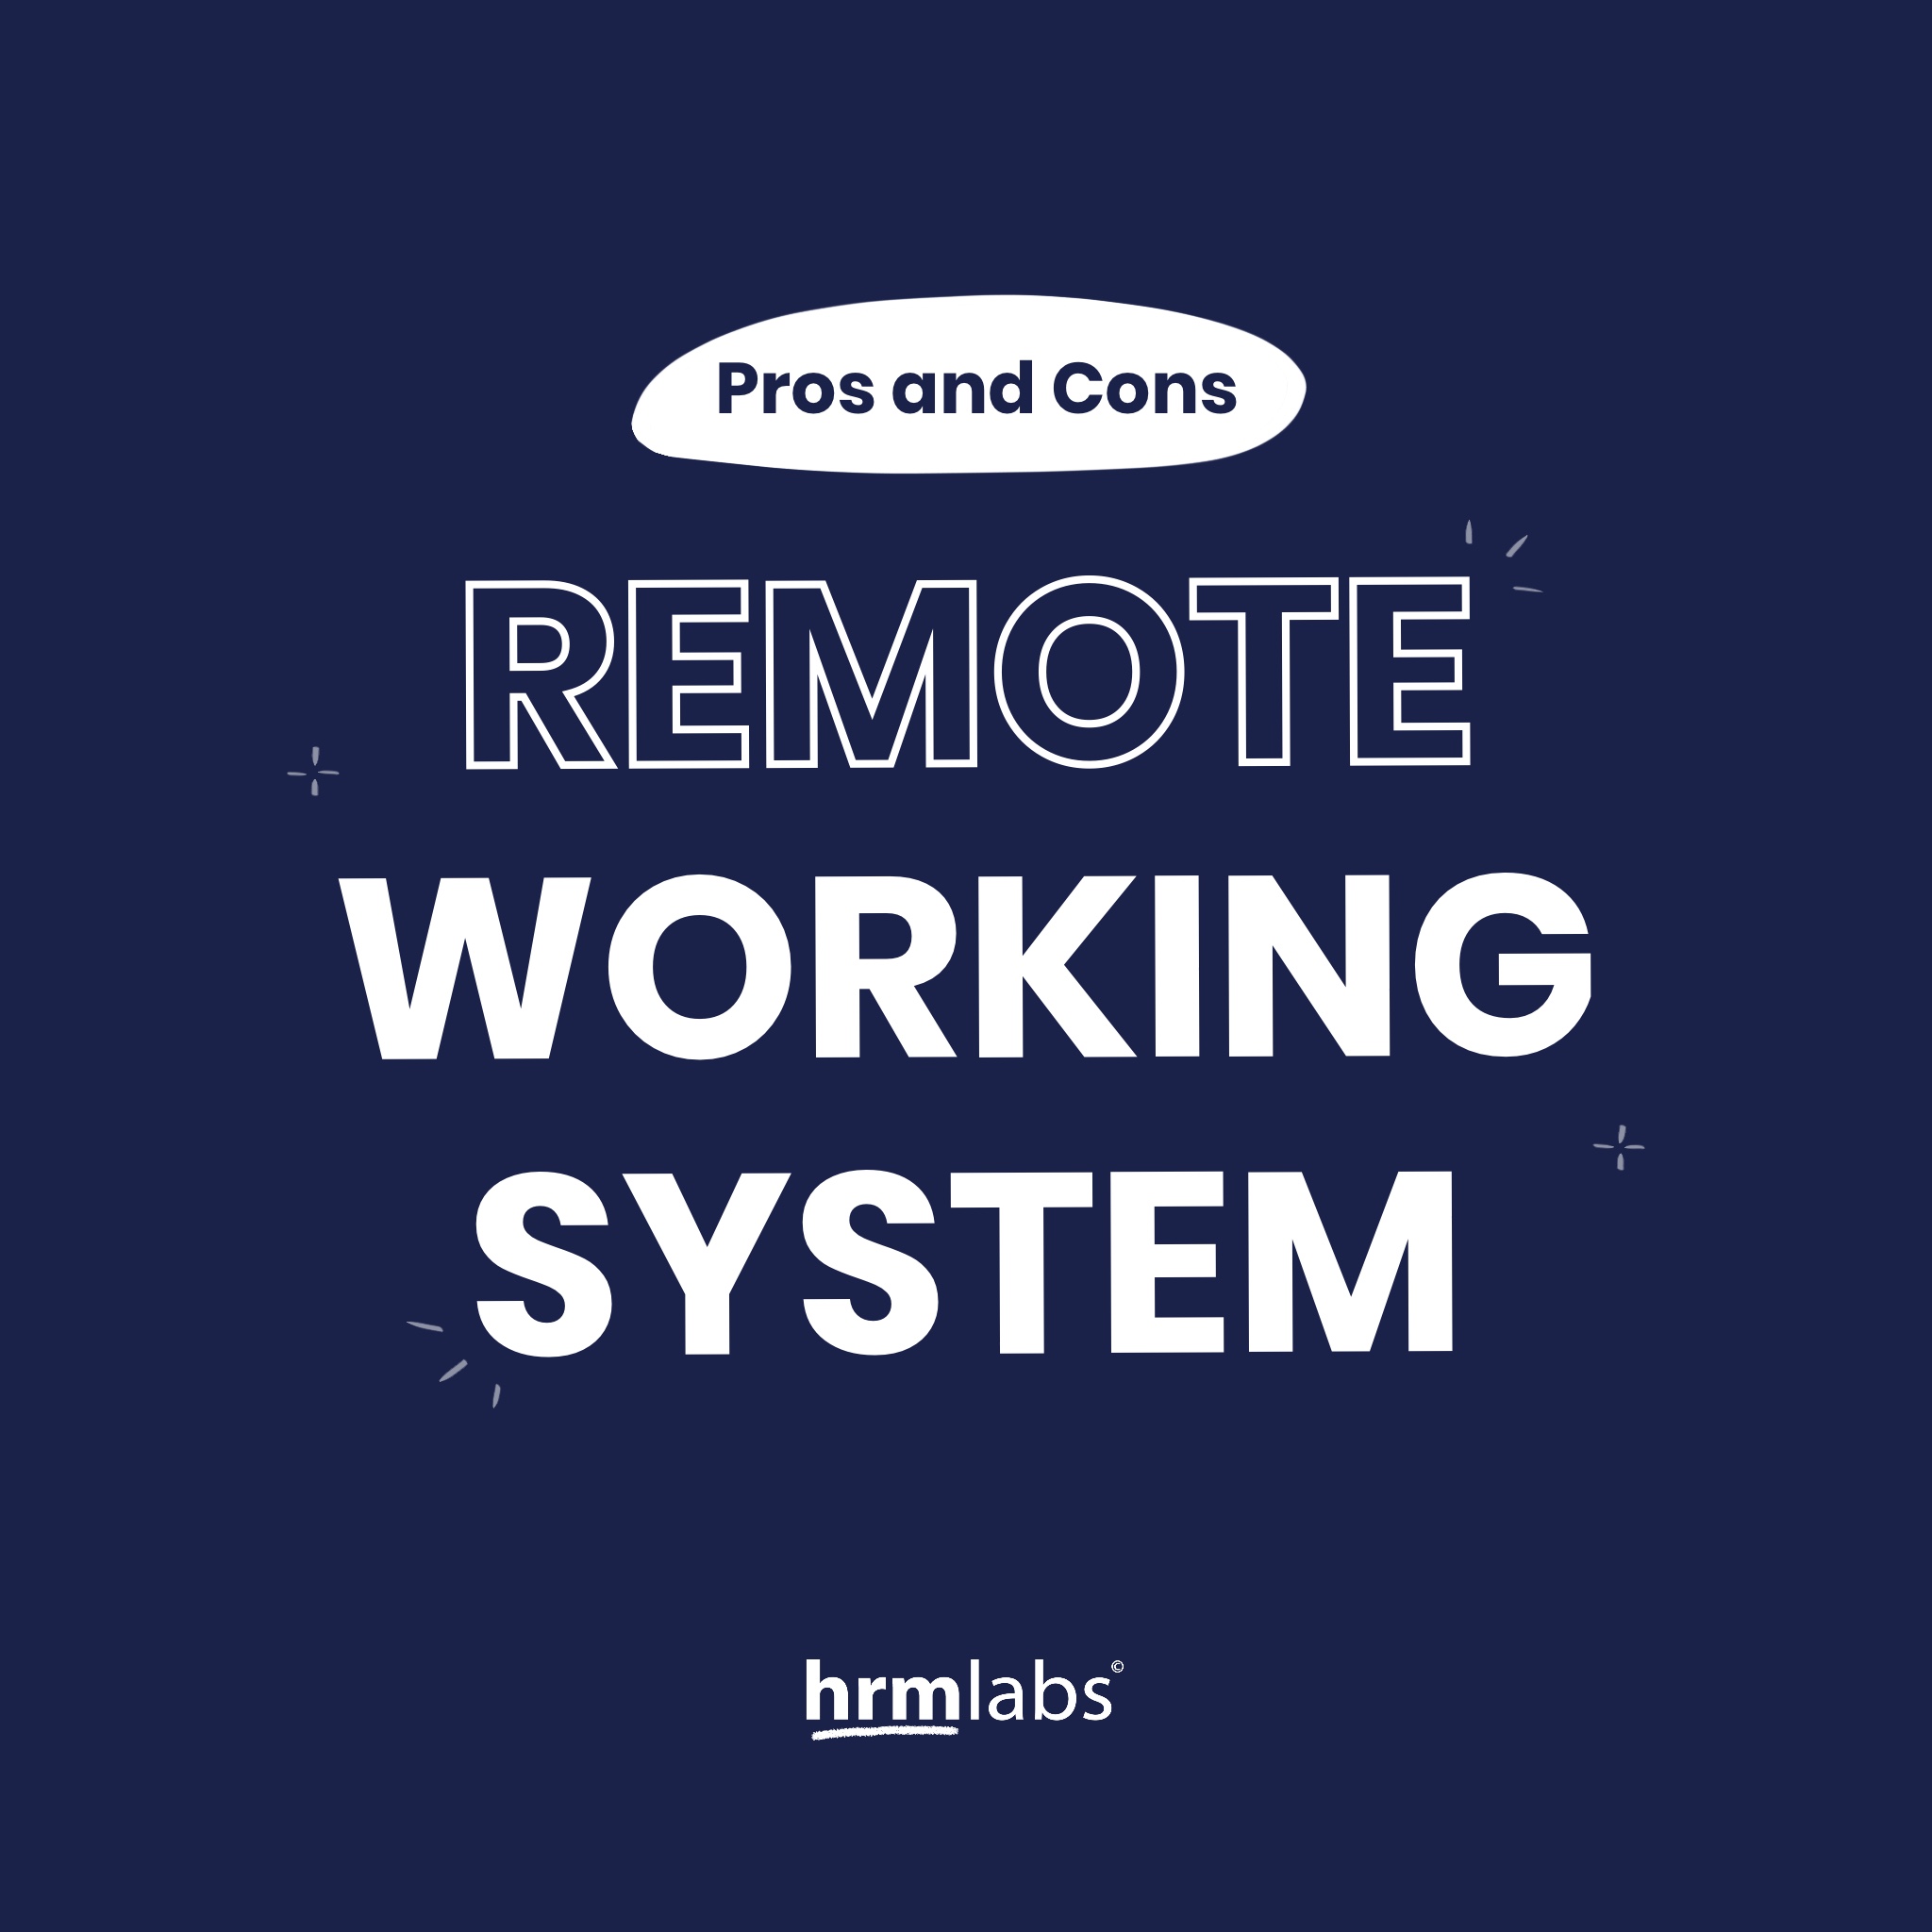 Remote working system